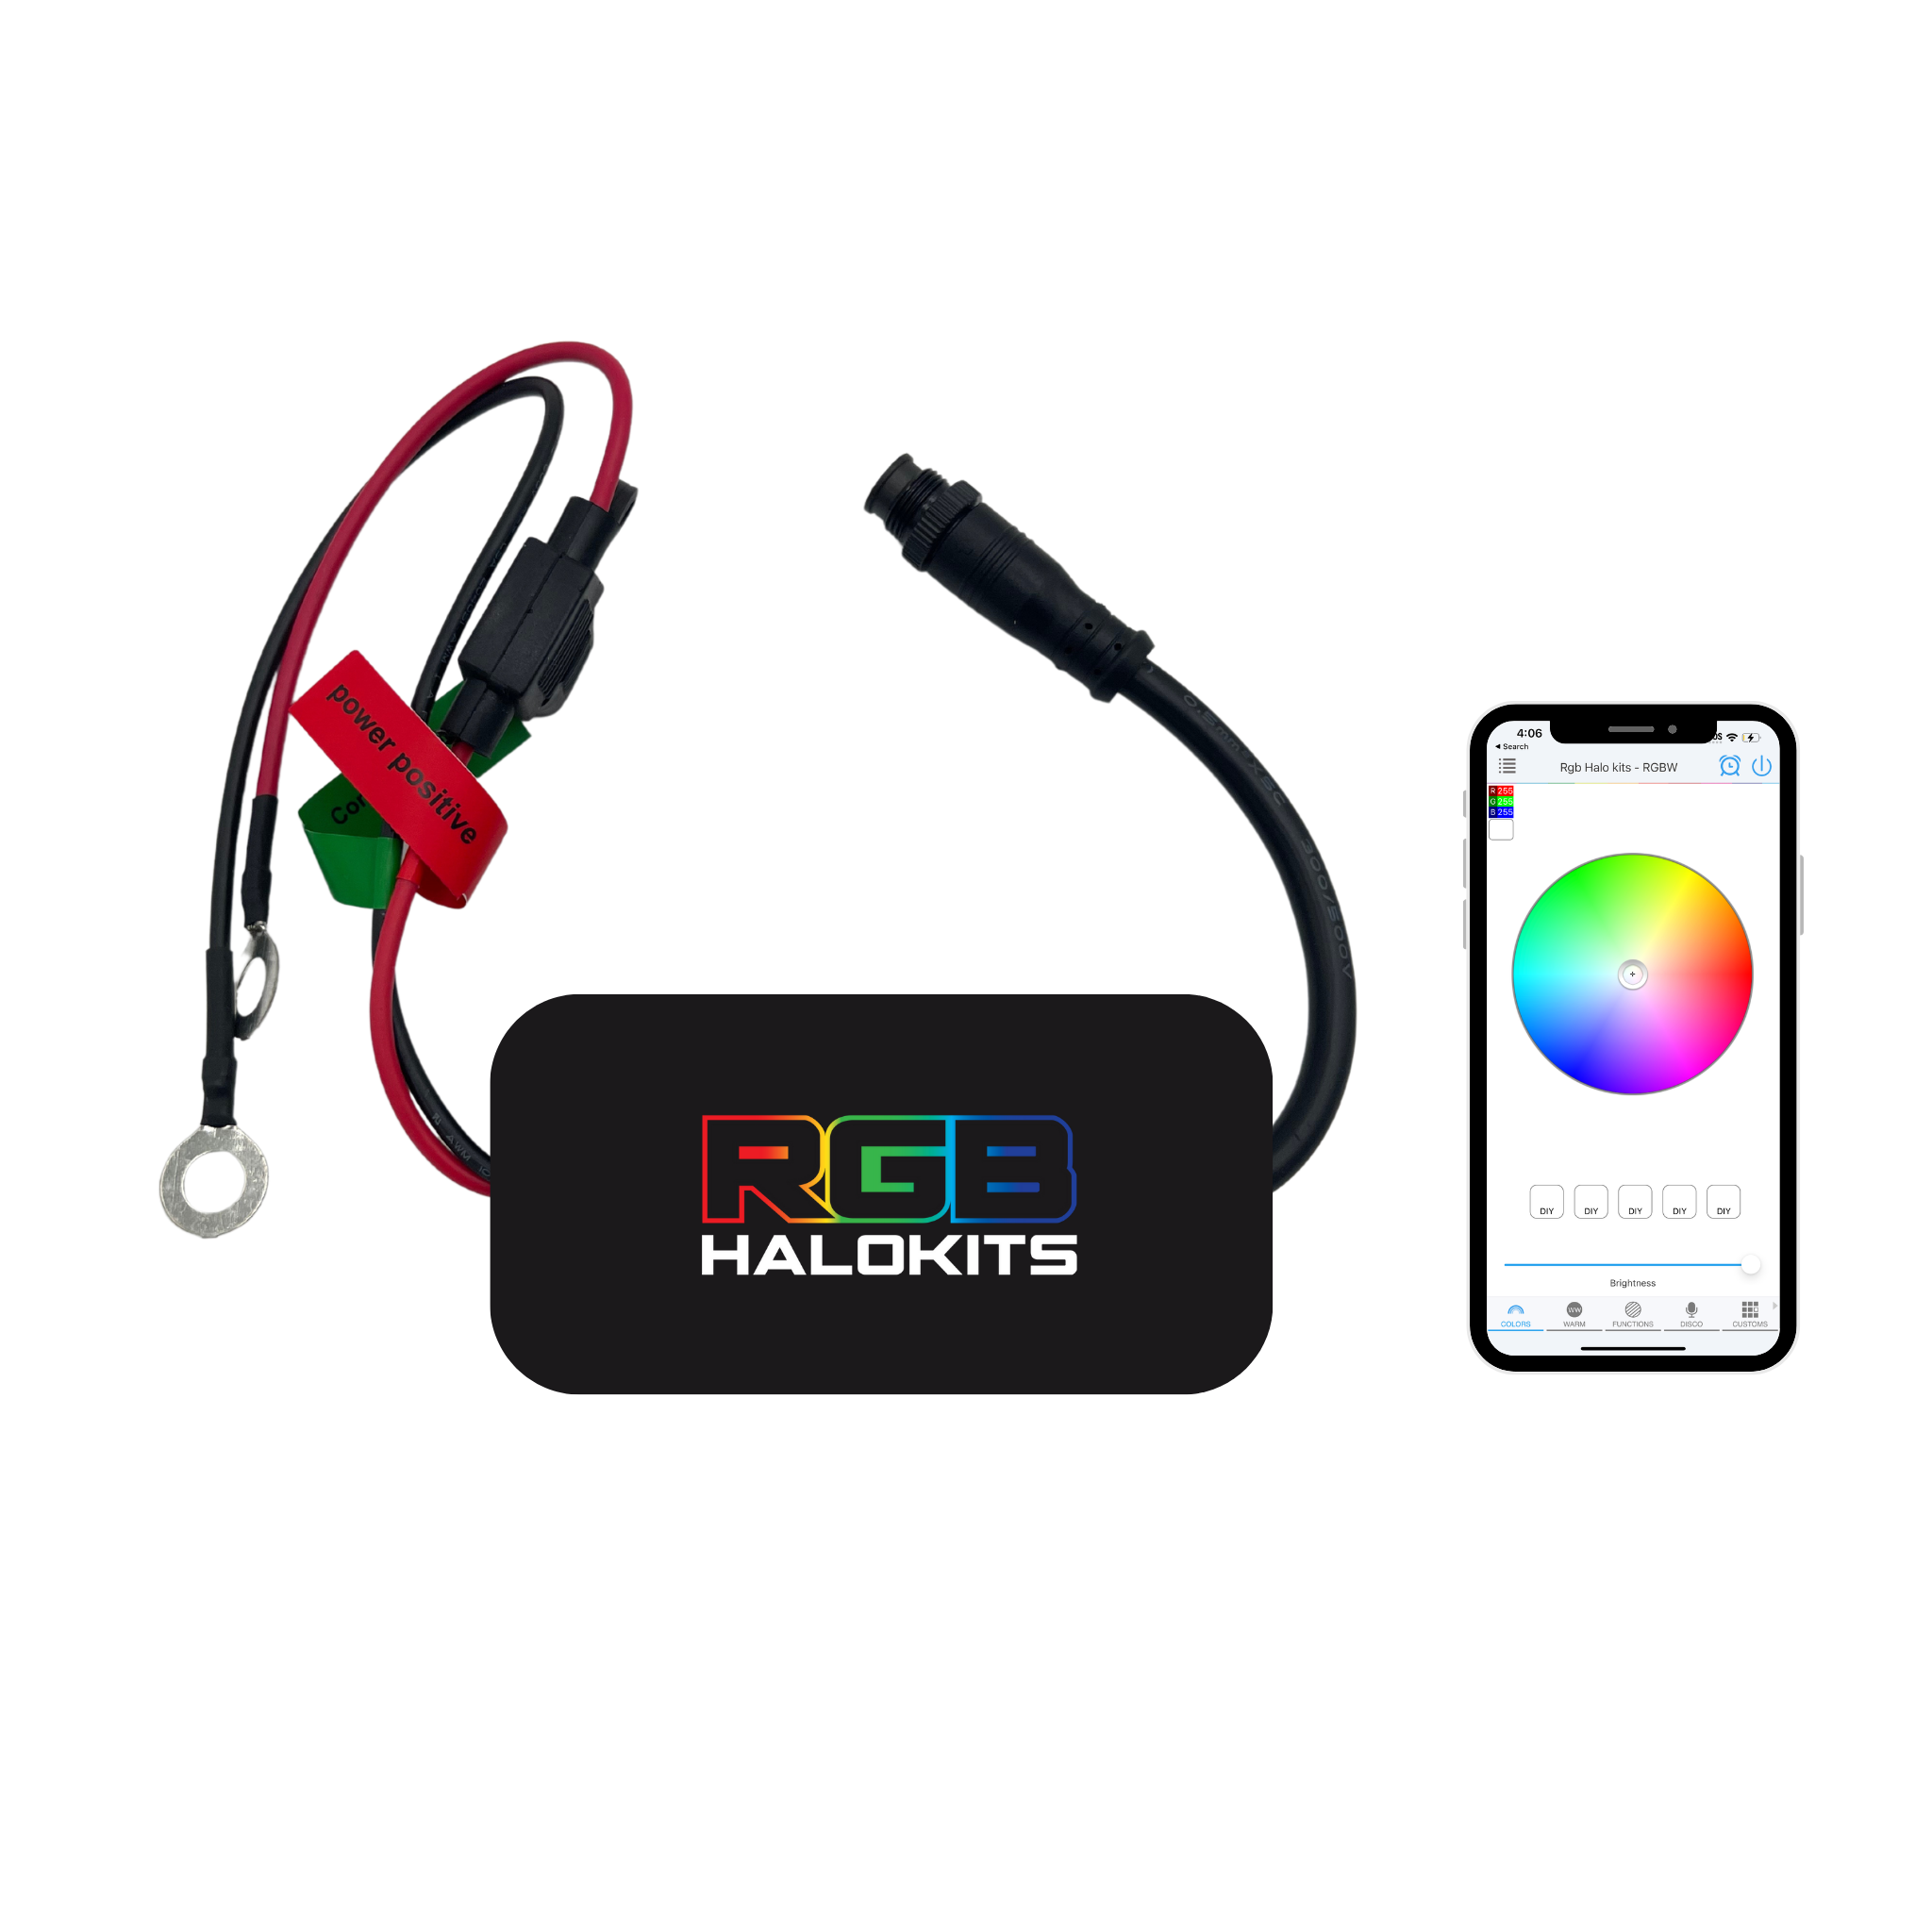 RGBW Bluetooth Controller - RGB Halo Kits Multicolor Flow Series Color Chasing RGBWA LED headlight kit Colorshift Oracle Lighting Trendz OneUpLighting Morimoto theretrofitsource AutoLEDTech Diode Dynamics